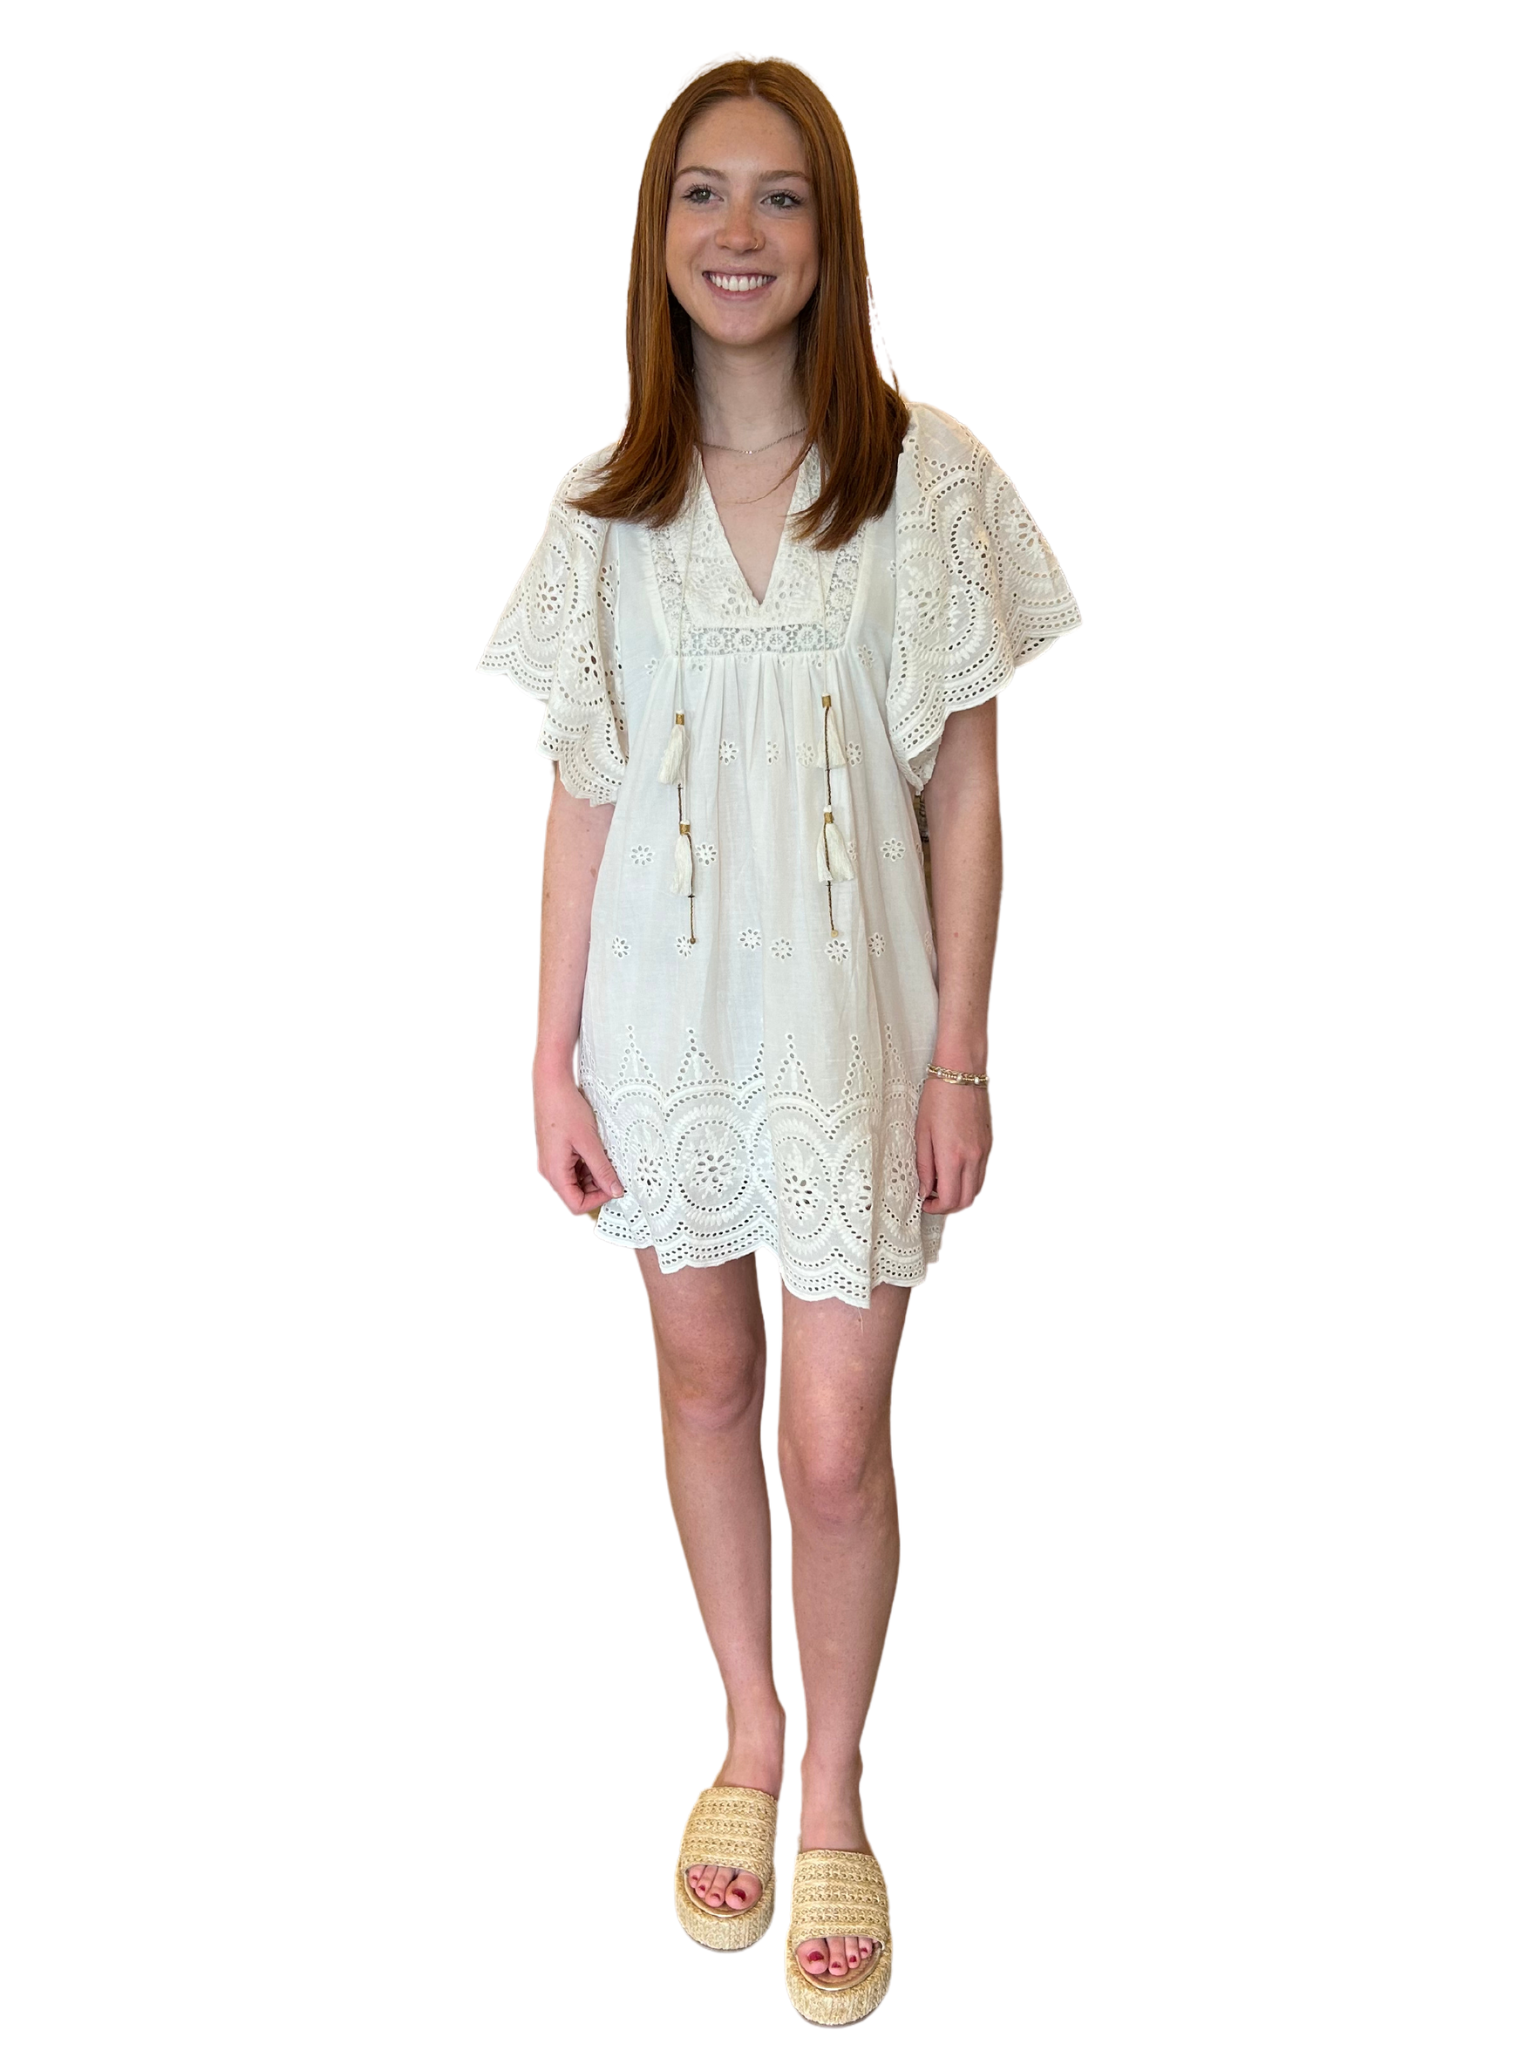 Amp up your summer style with the Angel Eyelet Dress by Bell Collectiton. Featurning&nbsp; flutter sleeves and playful tassel detailing. You'll be the belle of the beach in this unique and charming piece from Bell Collection!